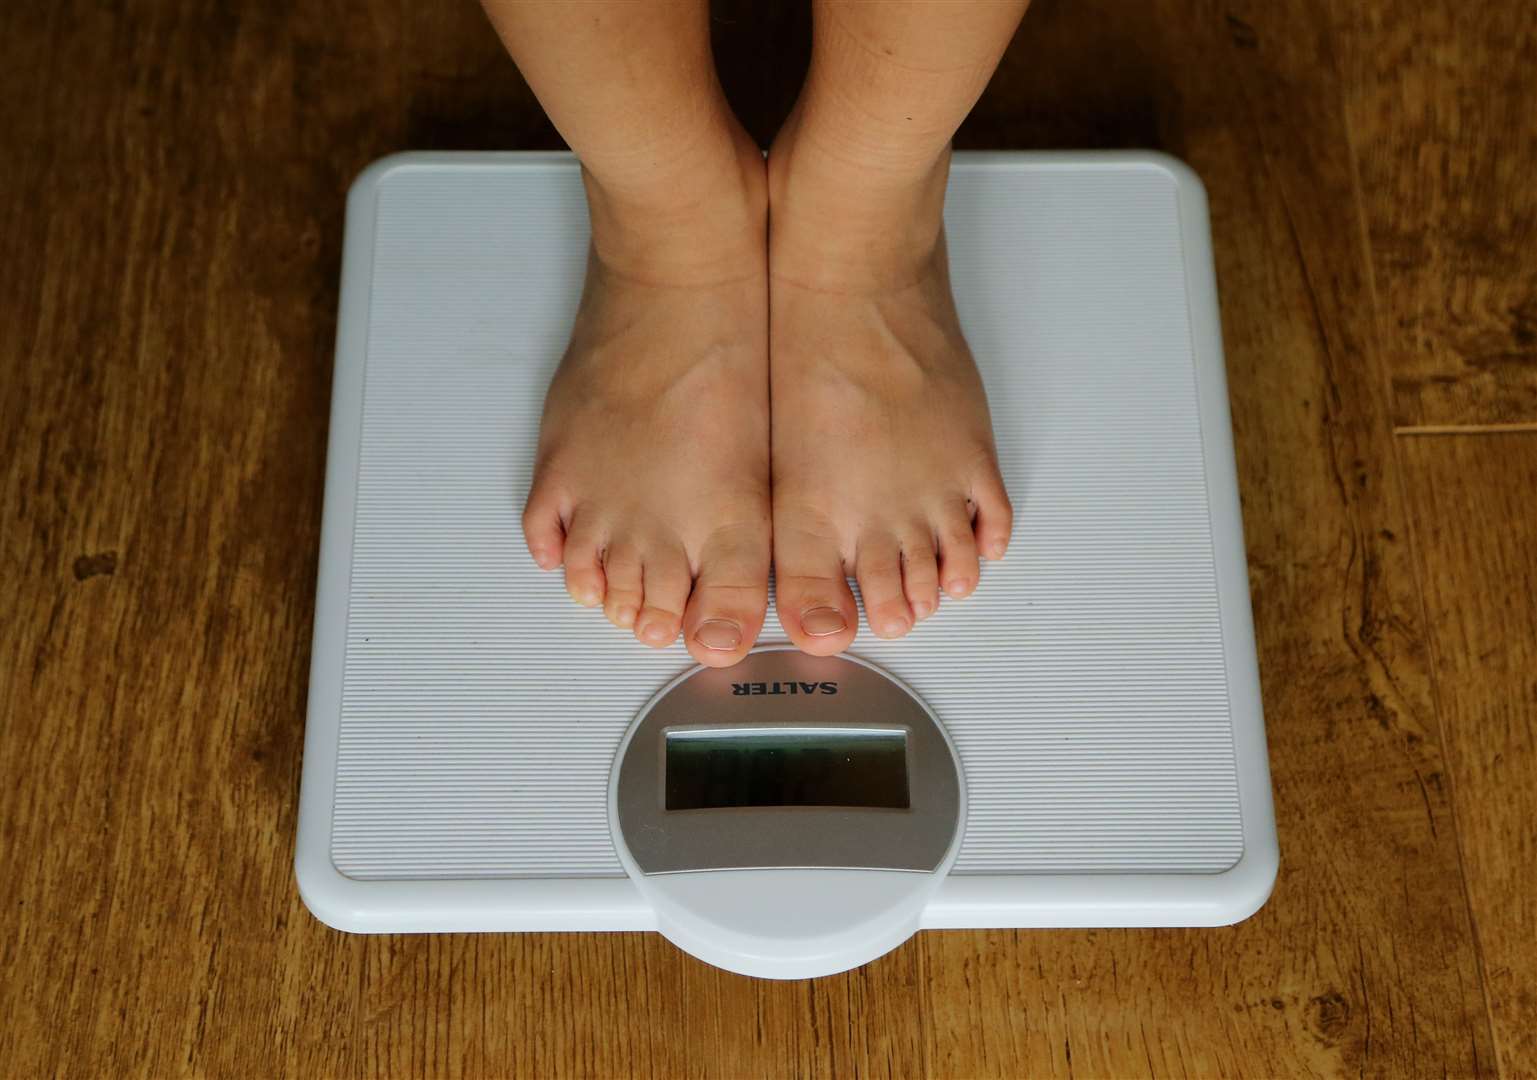 The Government said it remains committed to tackling childhood obesity (PA)